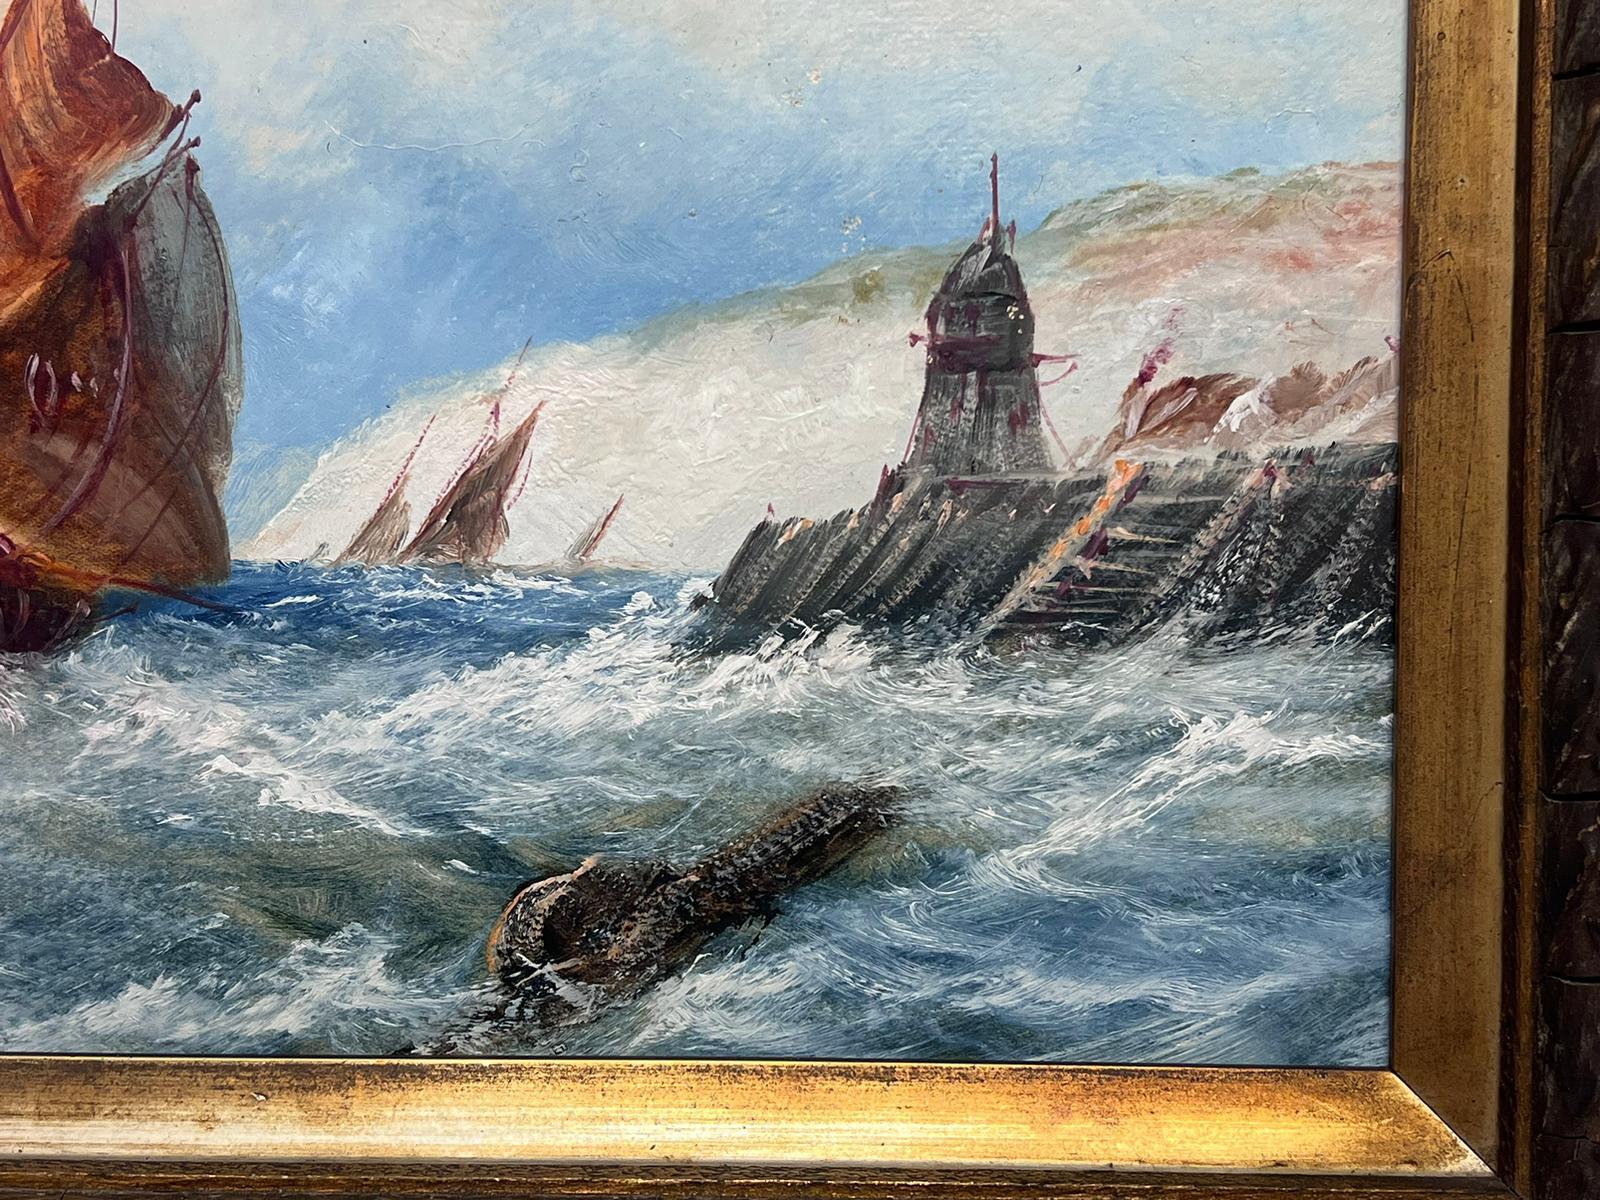 Shipping in Rough Seas
English School, late 19th century
oil on board, framed
framed: 17.5 x 25 inches
board: 12 x 20.5 inches
provenance: private collection, England
condition: very good and sound condition (frame is original but a little shabby,